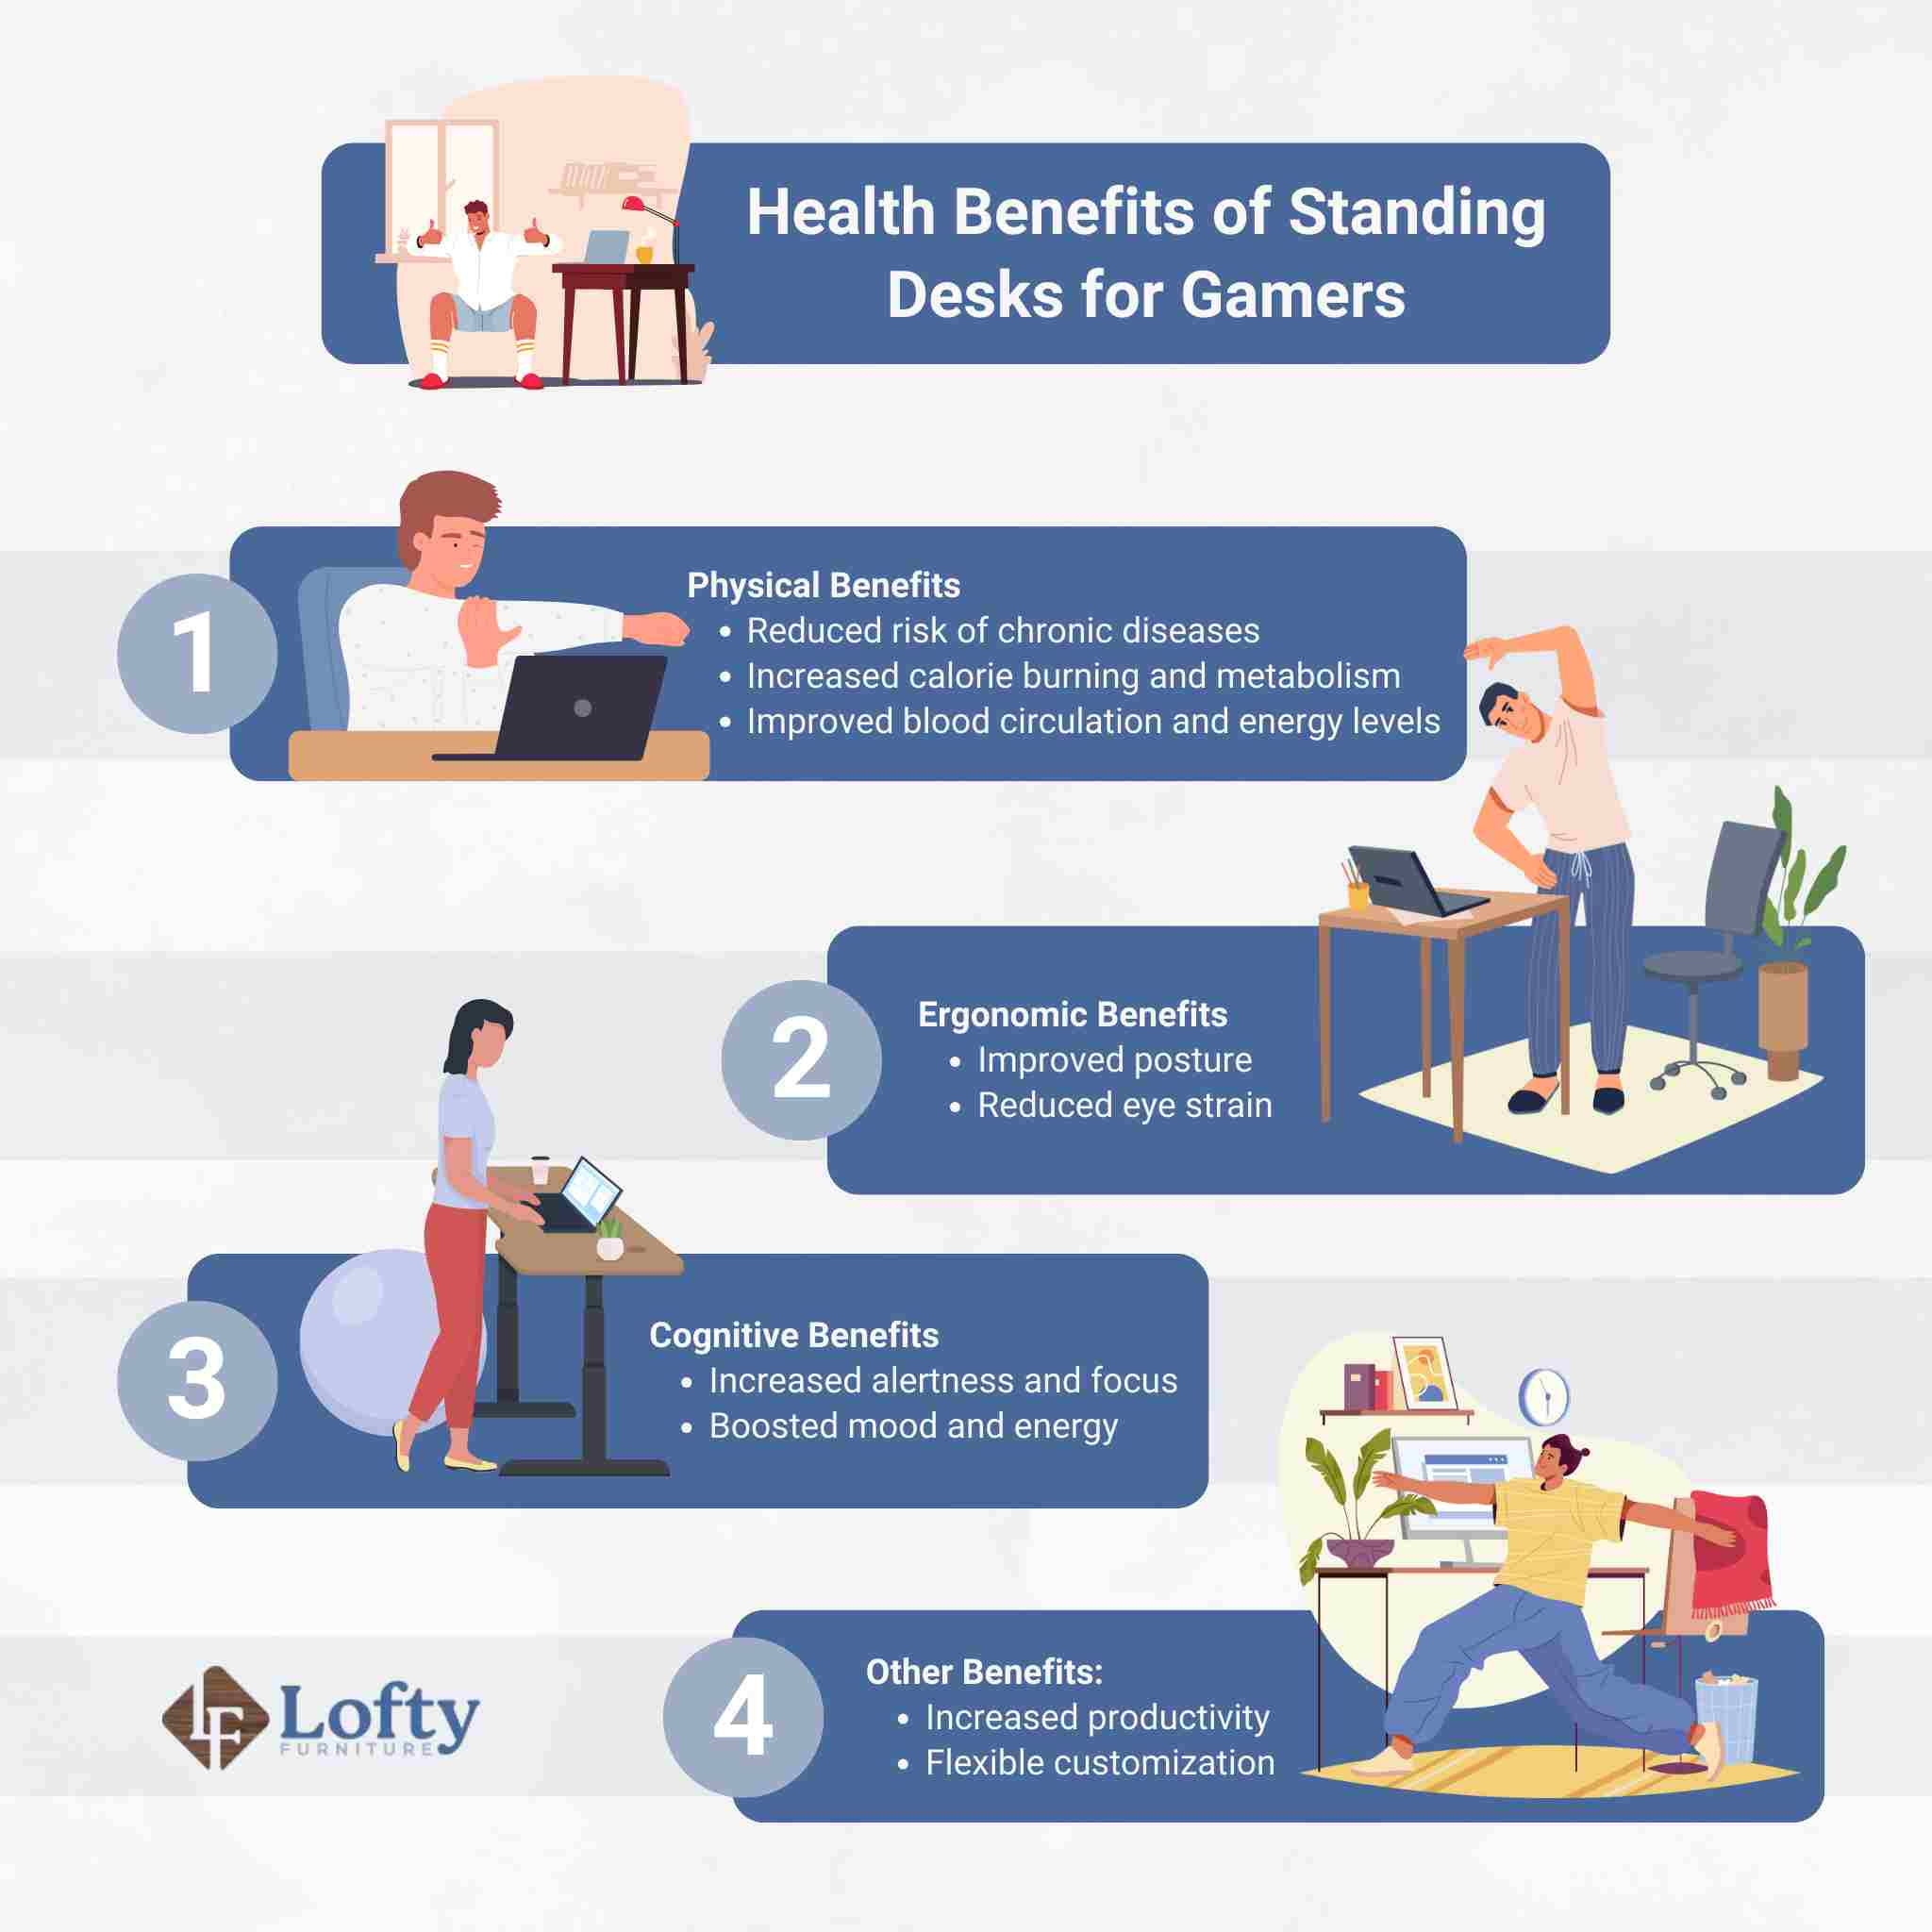 An illustration of the health benefits of standing desks for gamers.